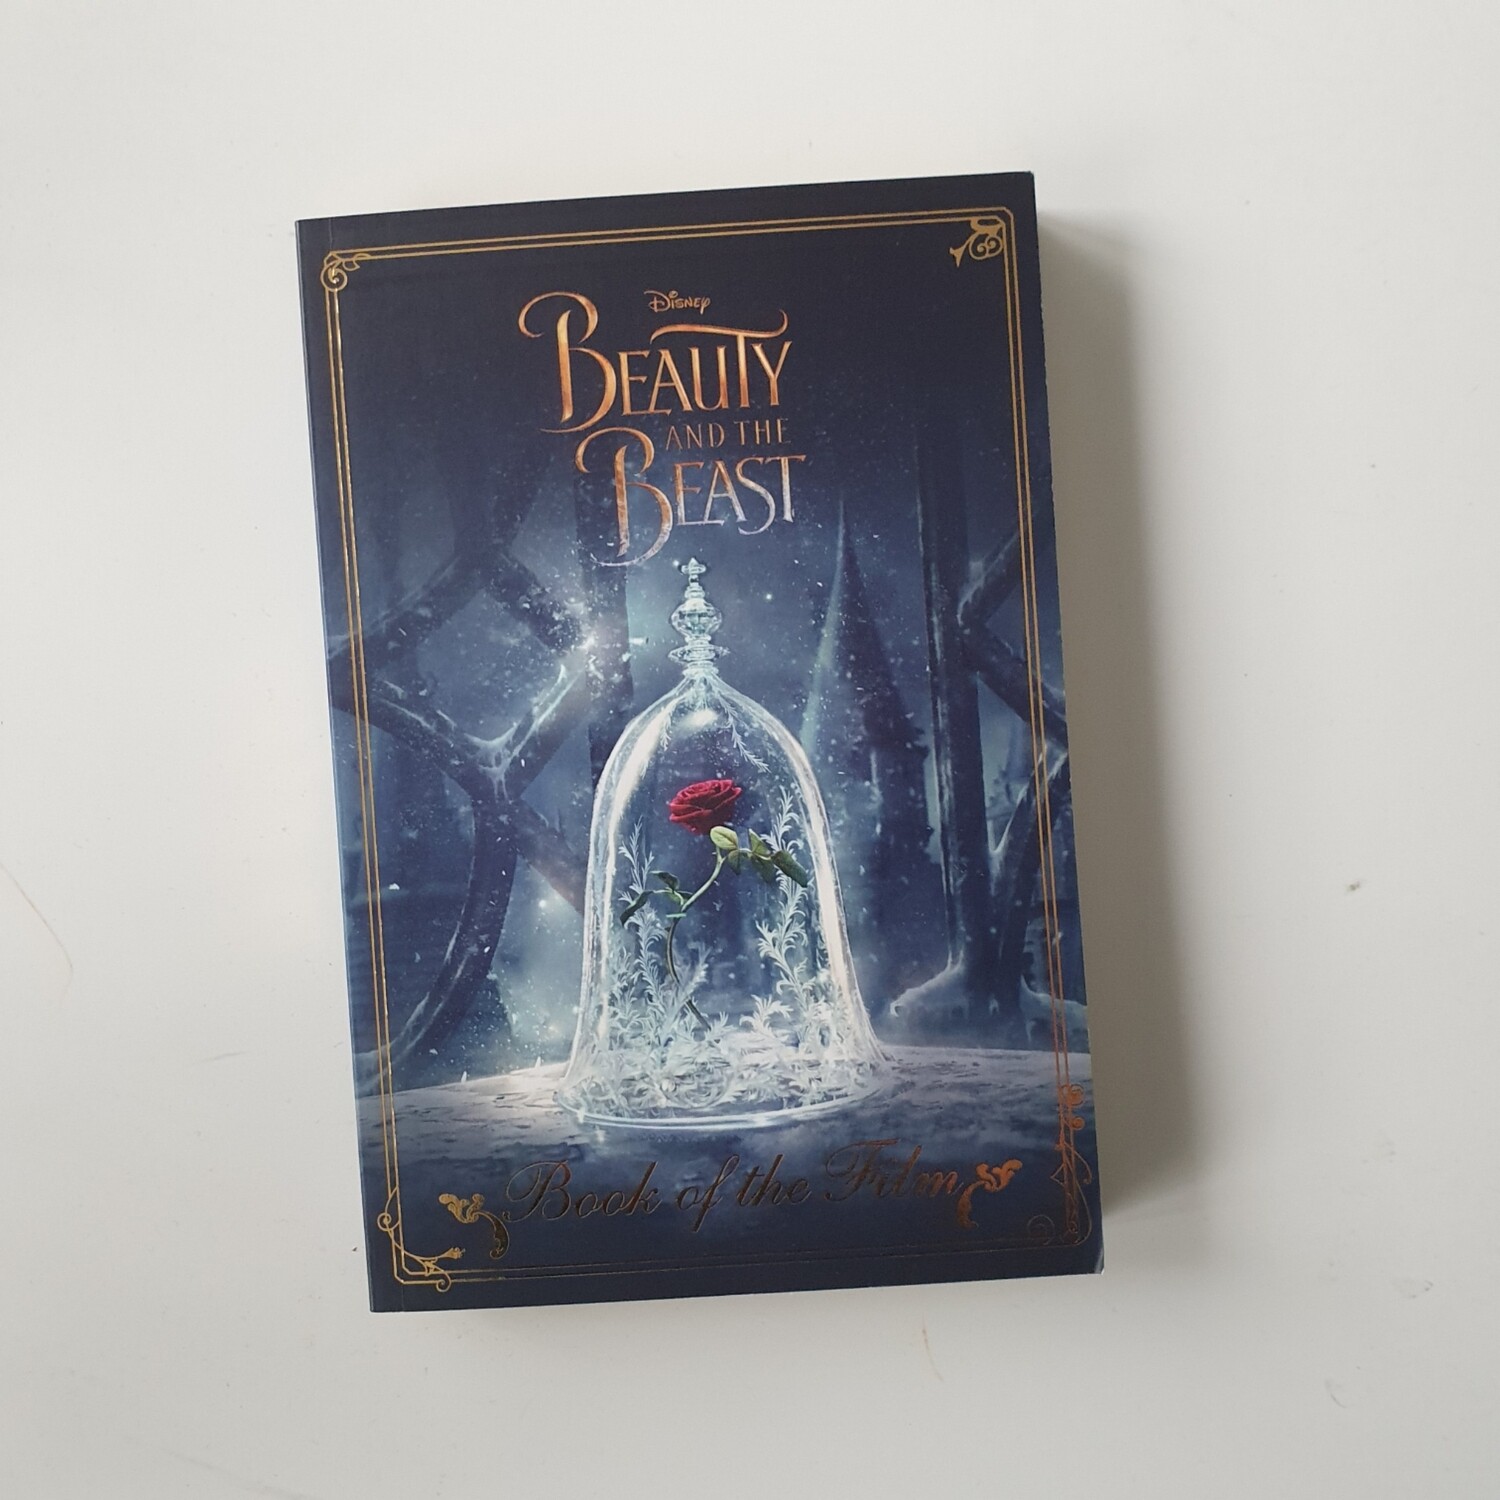 Beauty and the Beast Notebook - made from a paperback book